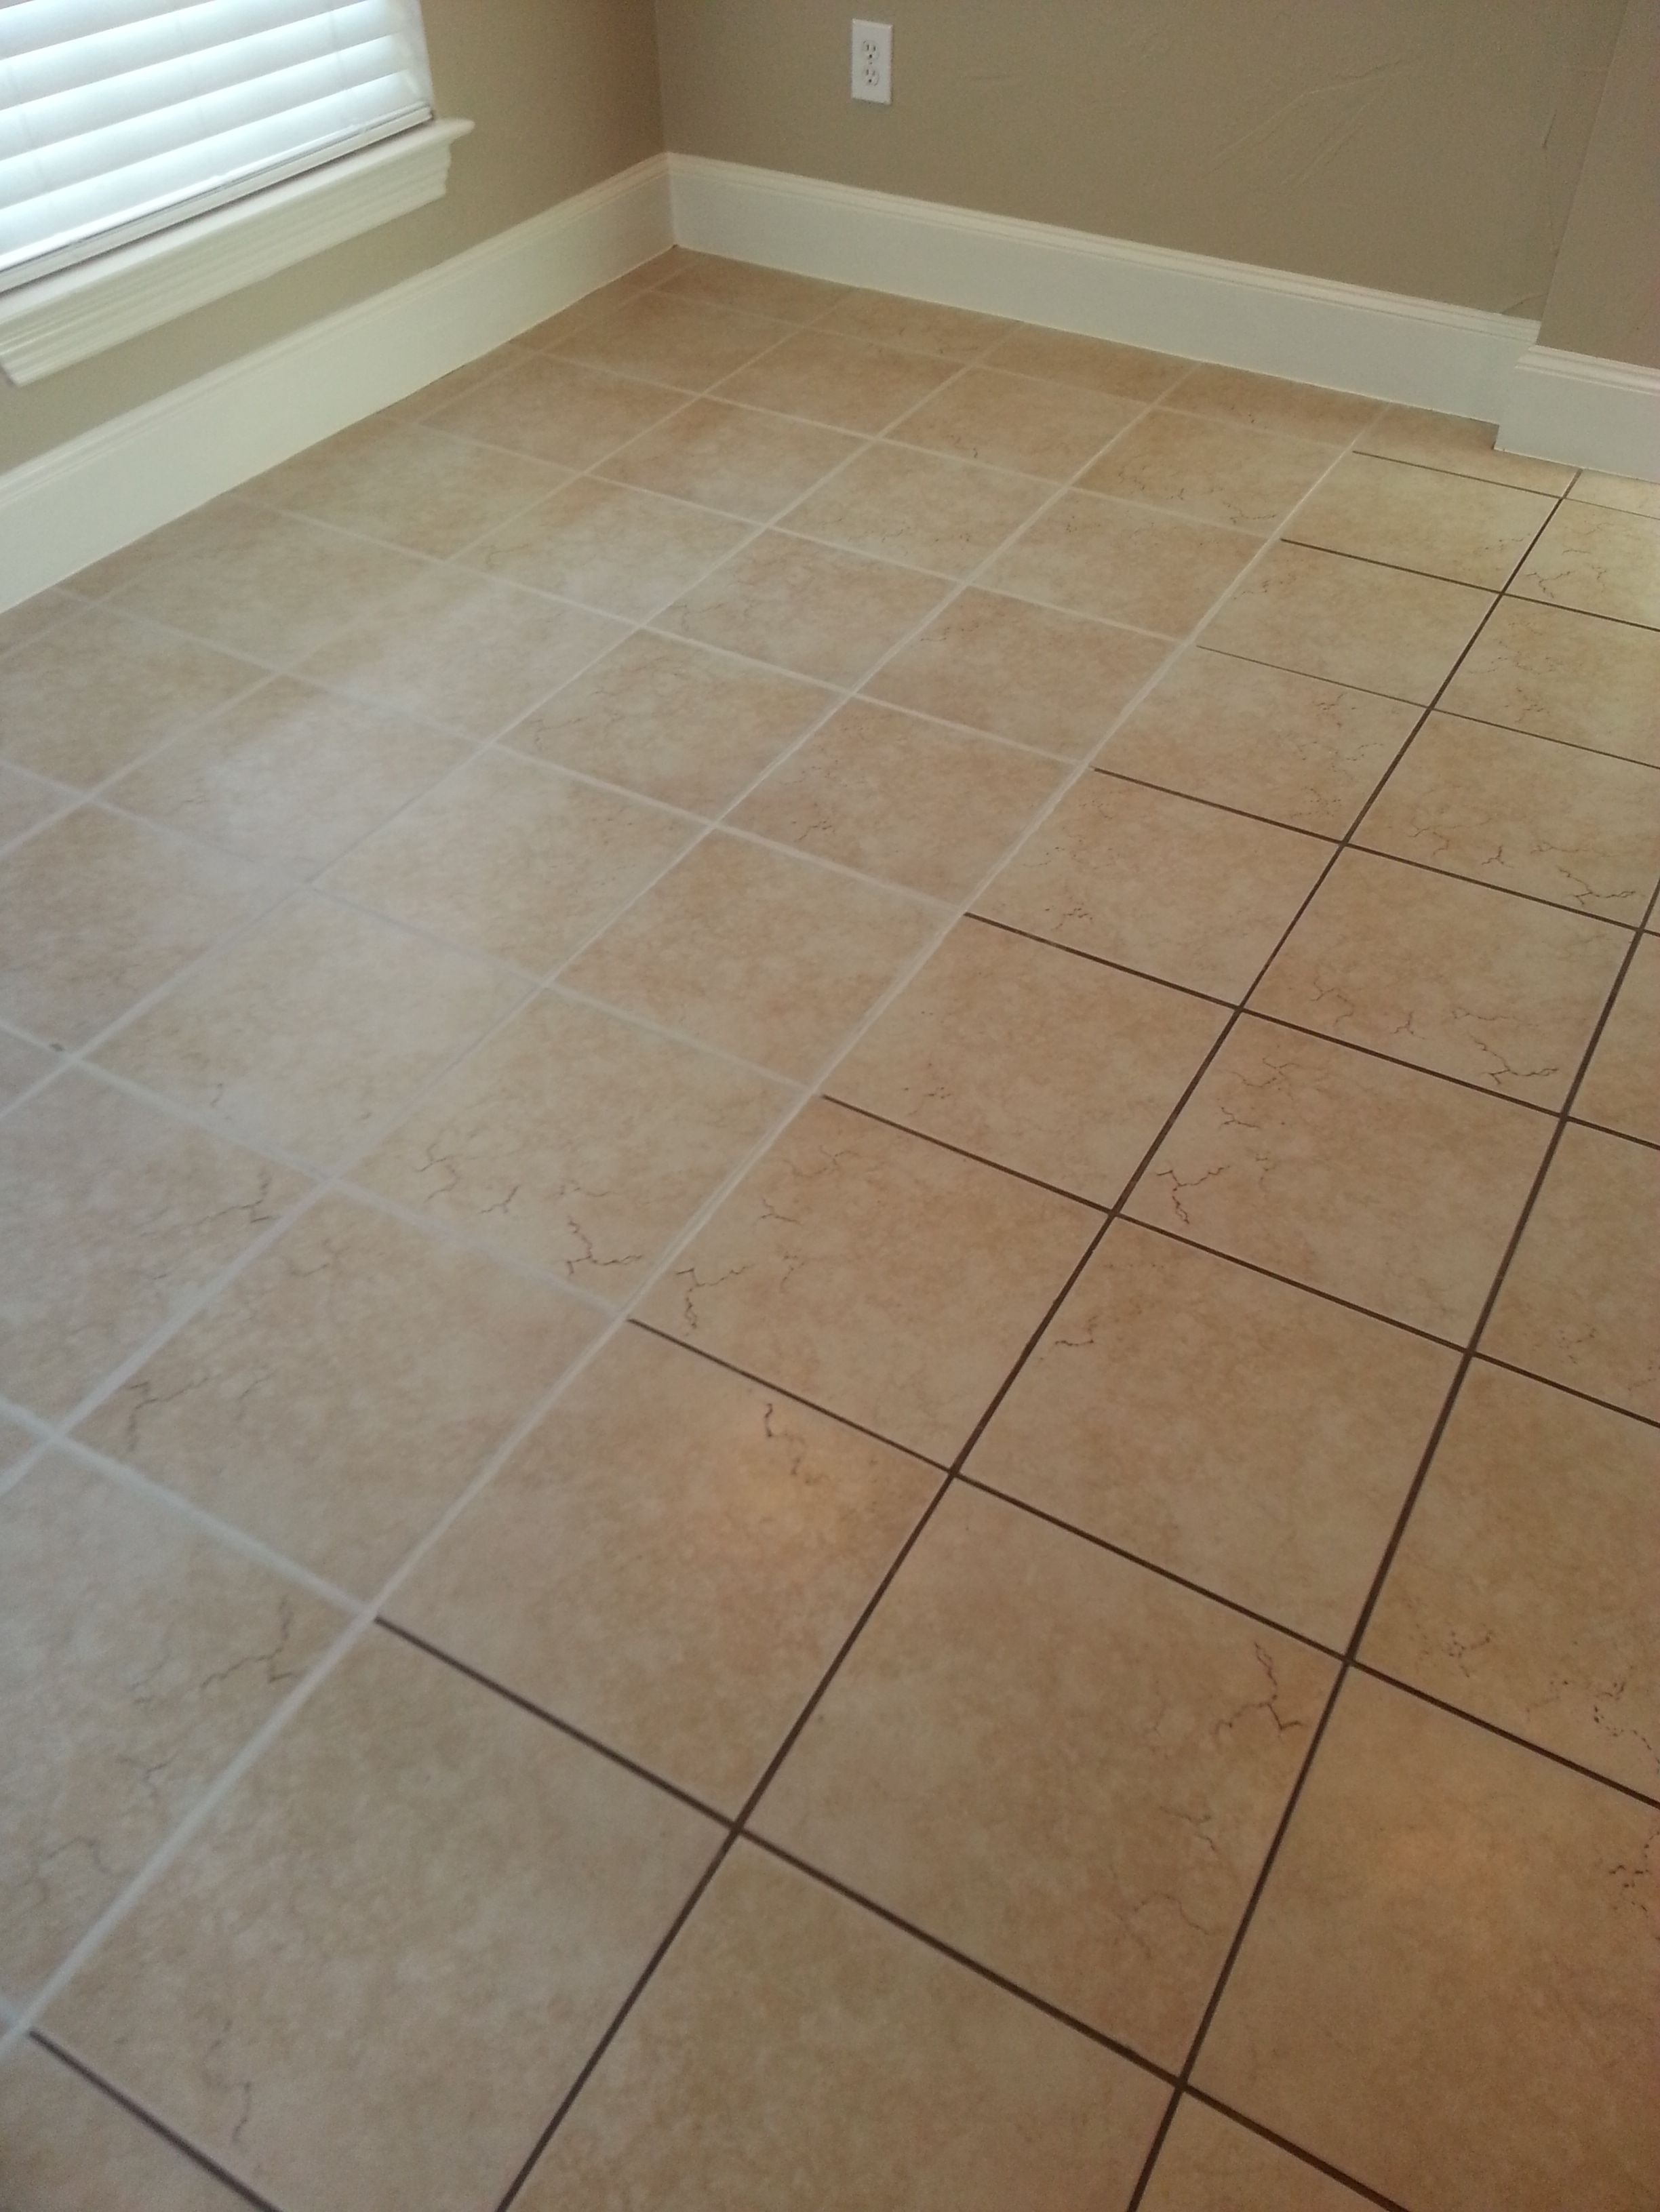 Tile and Grout Cleaning in Citrus Hills Florida Serving all Citrus County  Tile Cleaner - A Master's Touch Restorative Cleaning, LLC